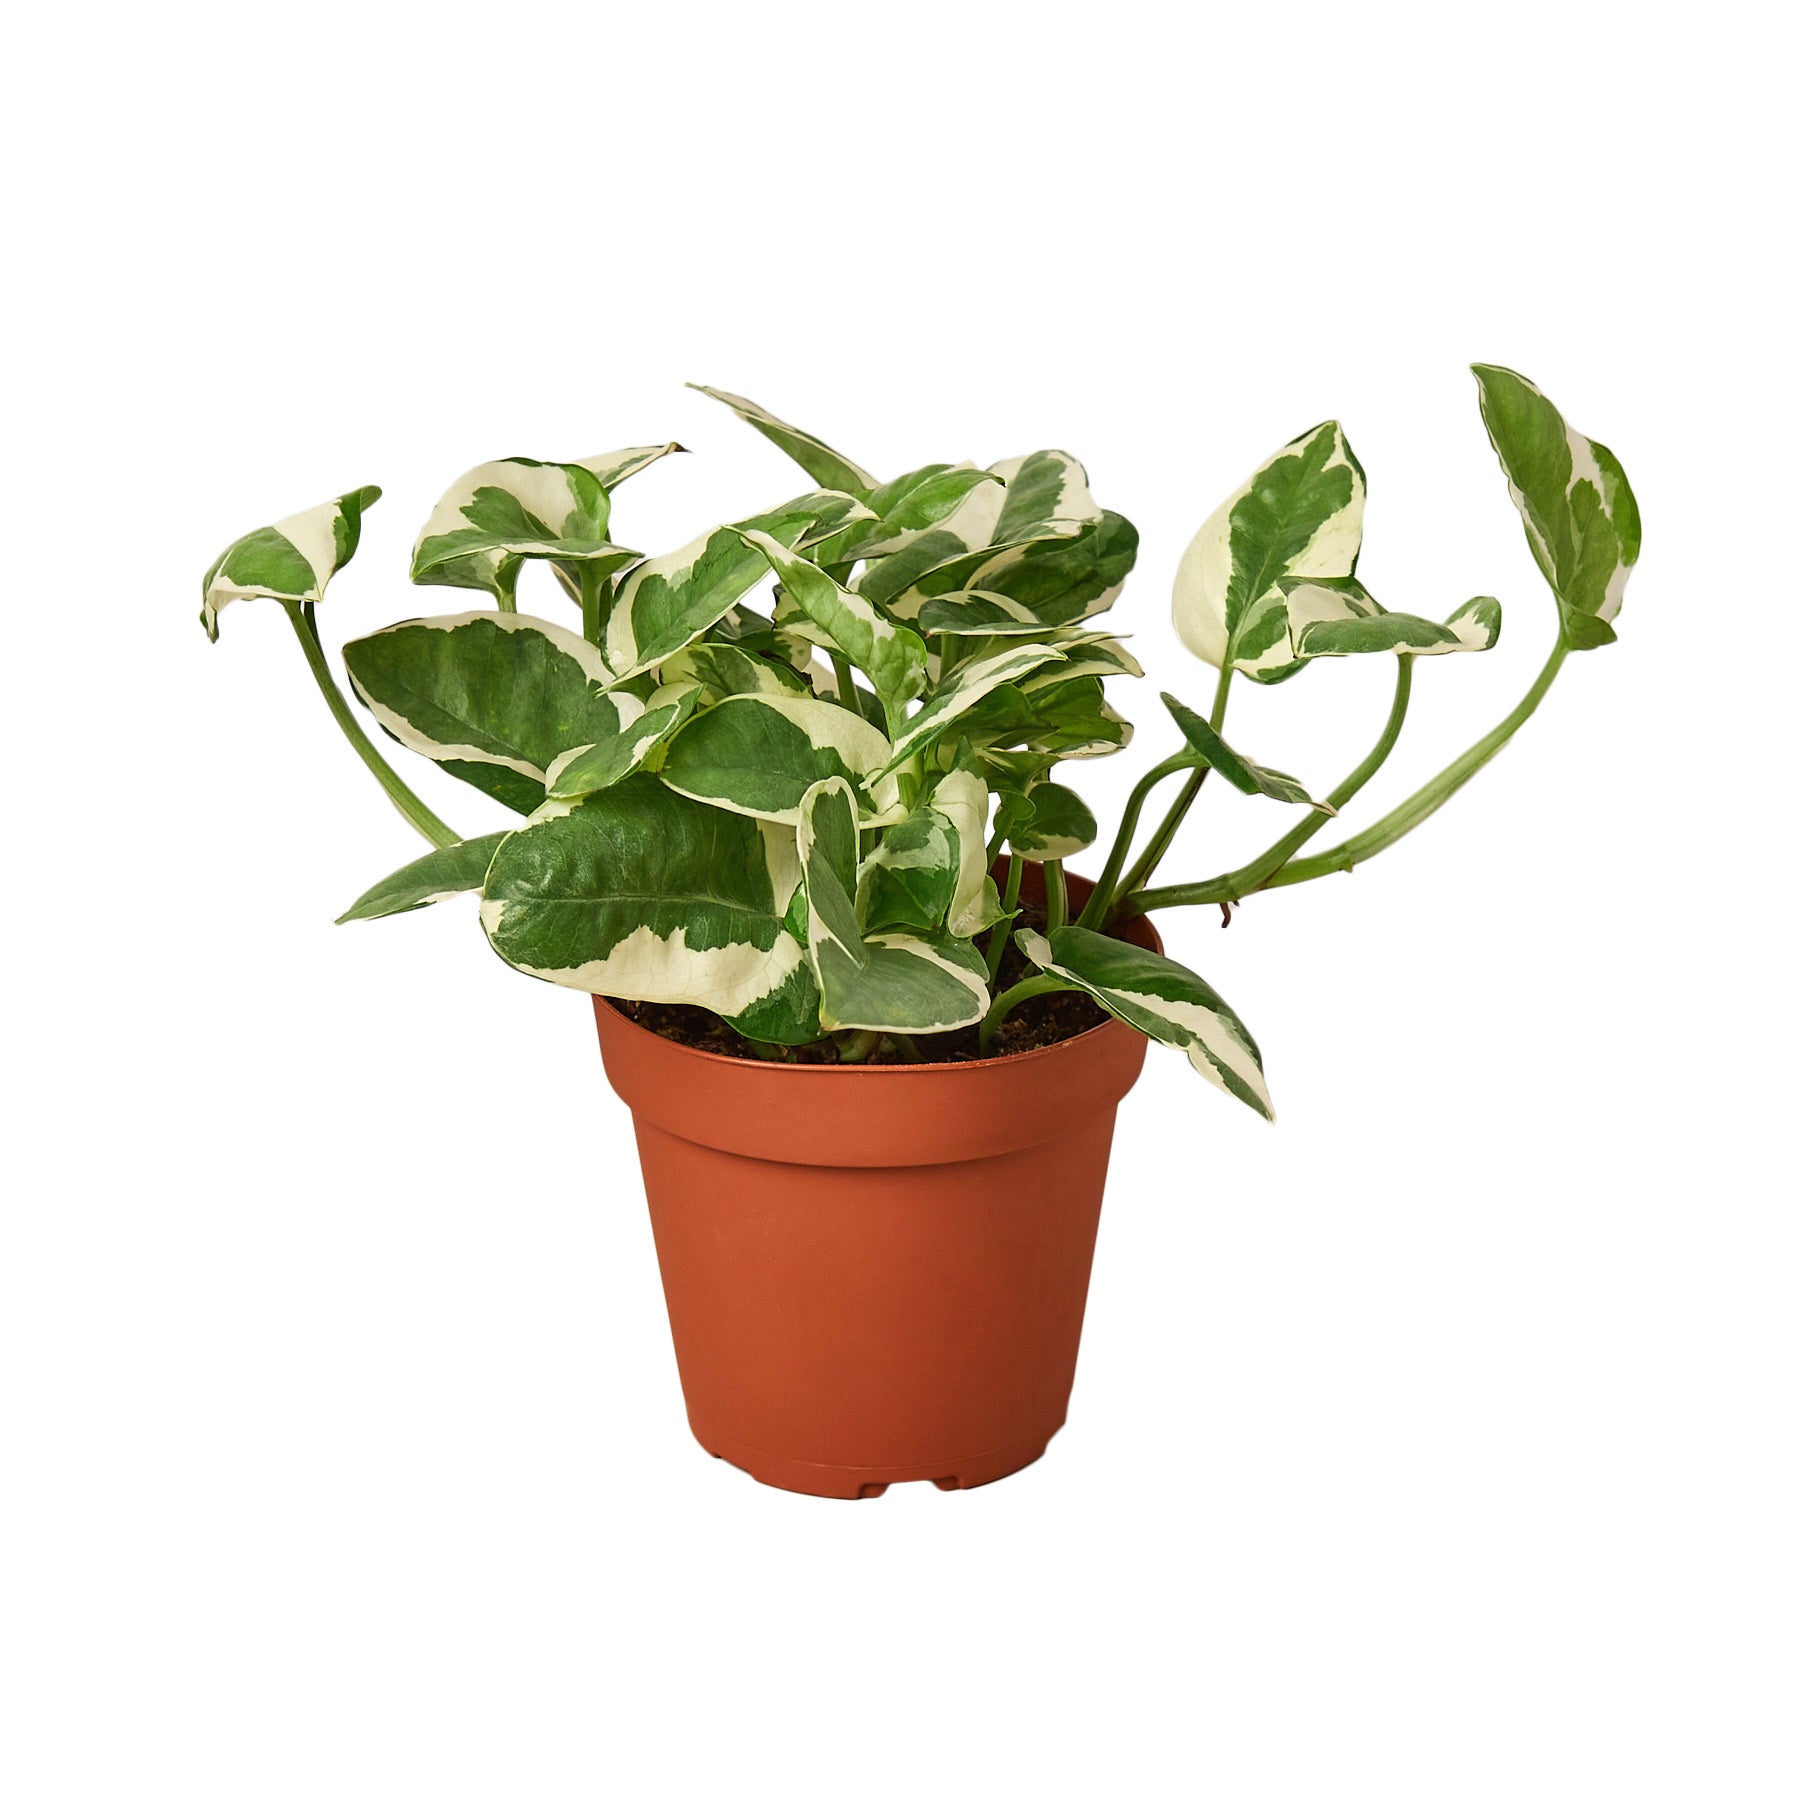 A potted plant on a white background at a nursery.